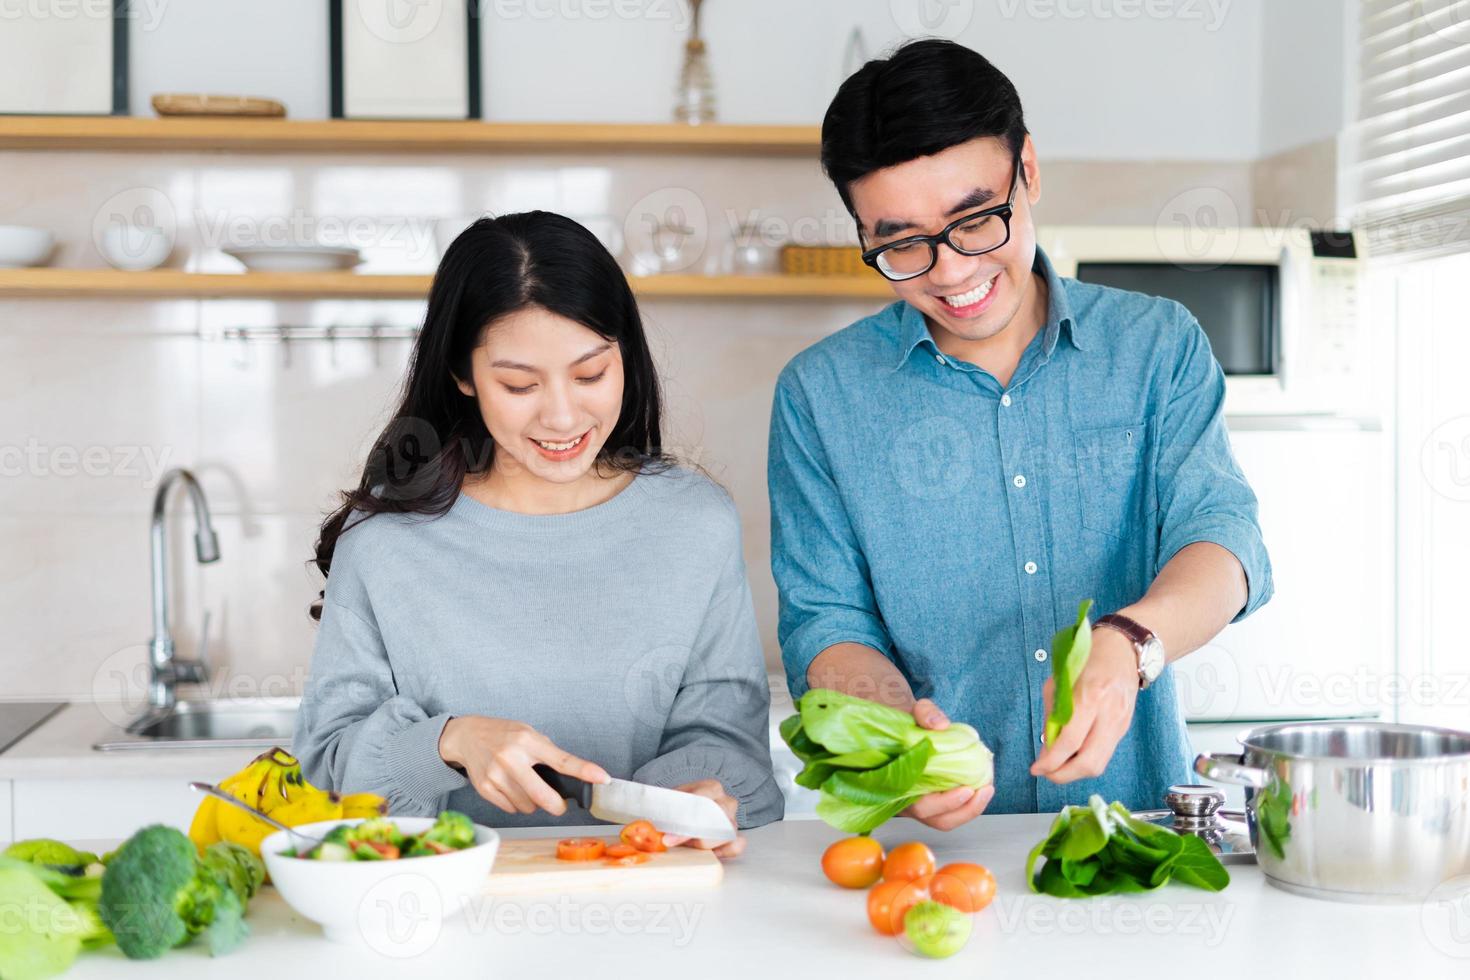 image of a couple cooking together photo